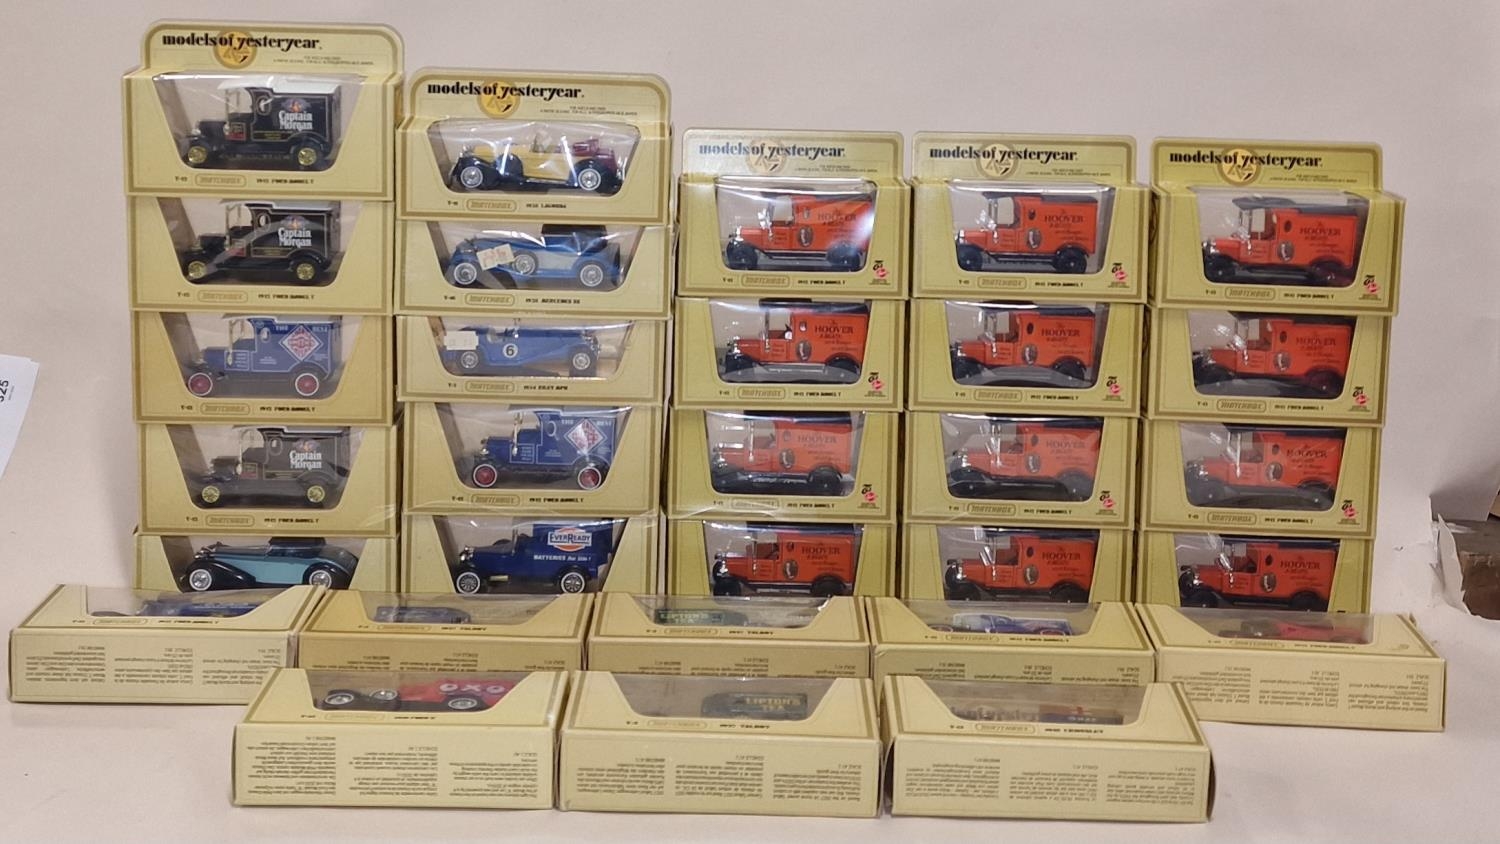 Large group of boxed 1970's Matchbox Models of Yesteryear die cast models. All appear new with boxes